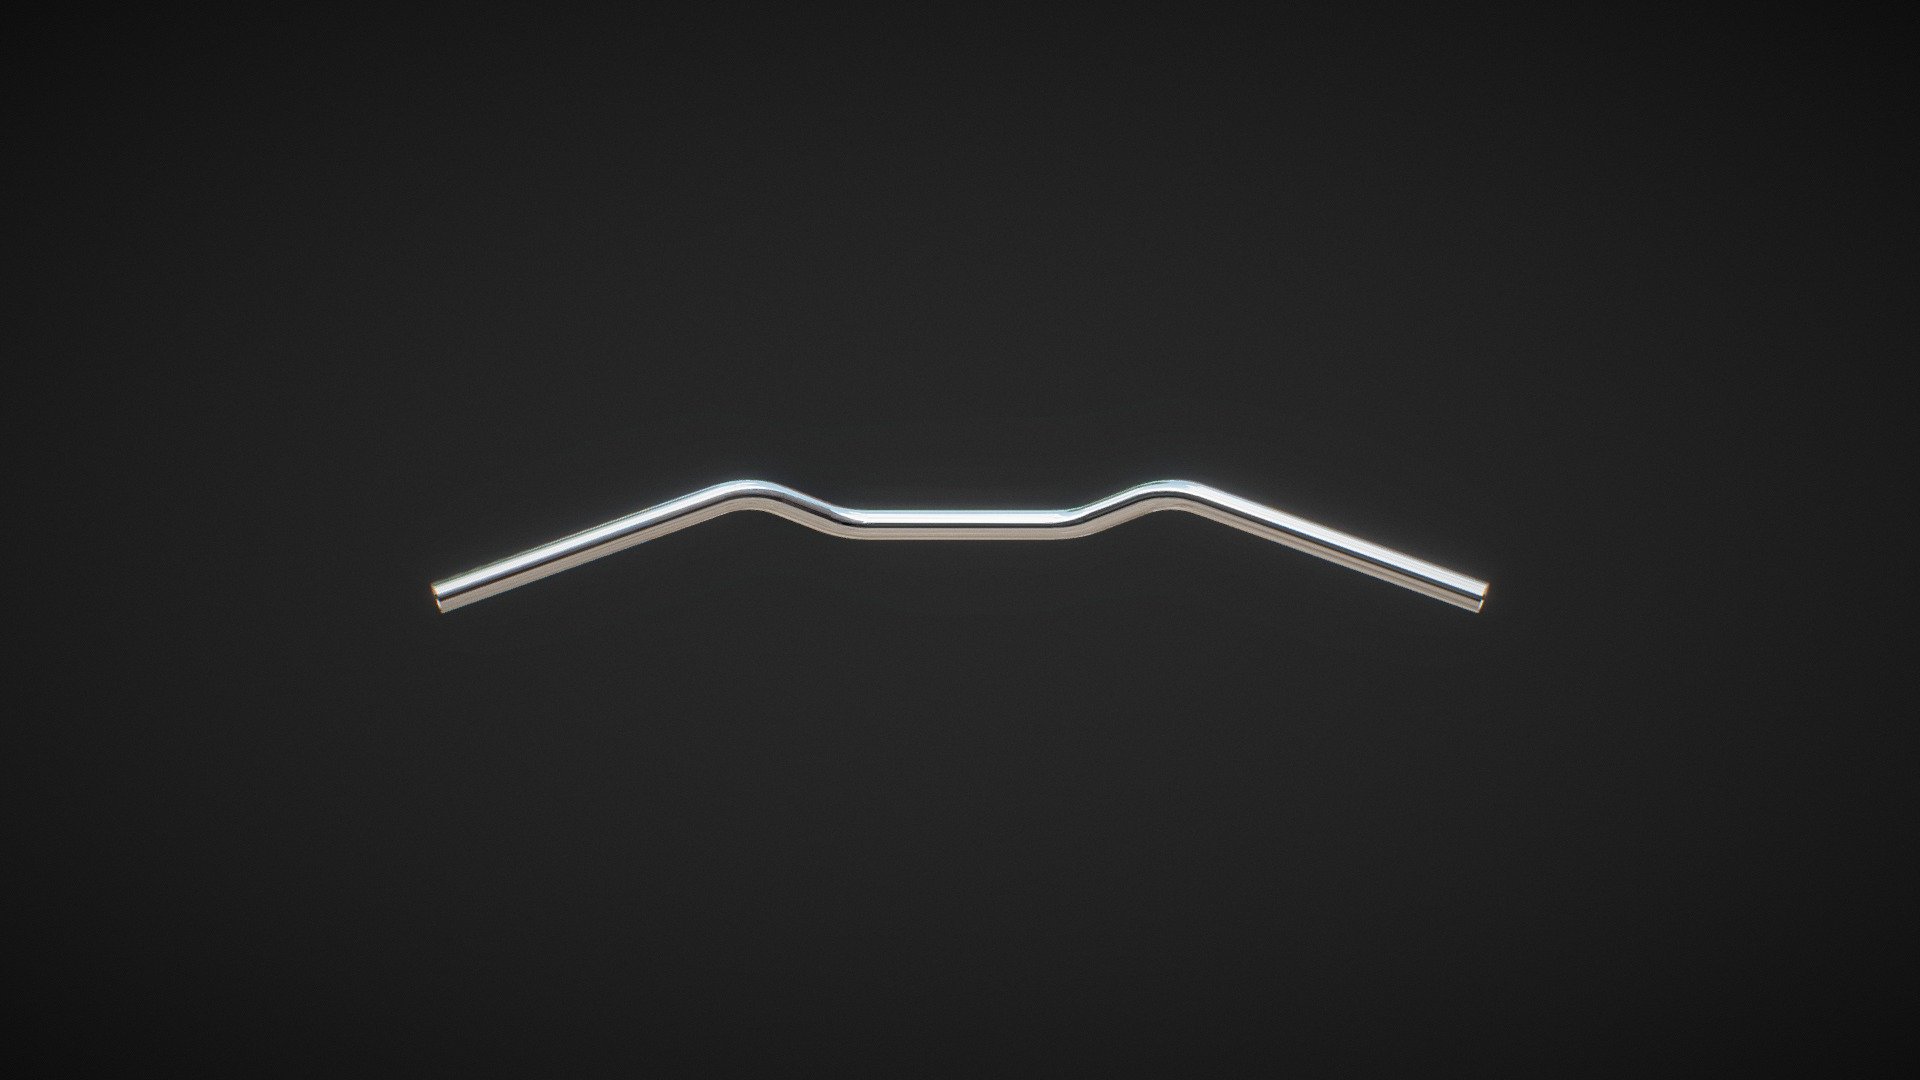 Handlebar »Tustin« by Bates; steel, chrome-plated; Ø 1”; wire routing: W2 with dimples (1982→); measures in cm (rounded) according to drawing: B total width: 81 cm, C center width: 15 cm, H height: 4 cm, height @ bar end: 4 cm, T depth: 12 cm; wall thickness: 3 mm; Germany; GTIN: 4062094208478; W&amp;amp;W-№: 20-847 - Bates Tustin chrome with dimples - 3D model by W&W Cycles AG (@wwcycles) 3d model